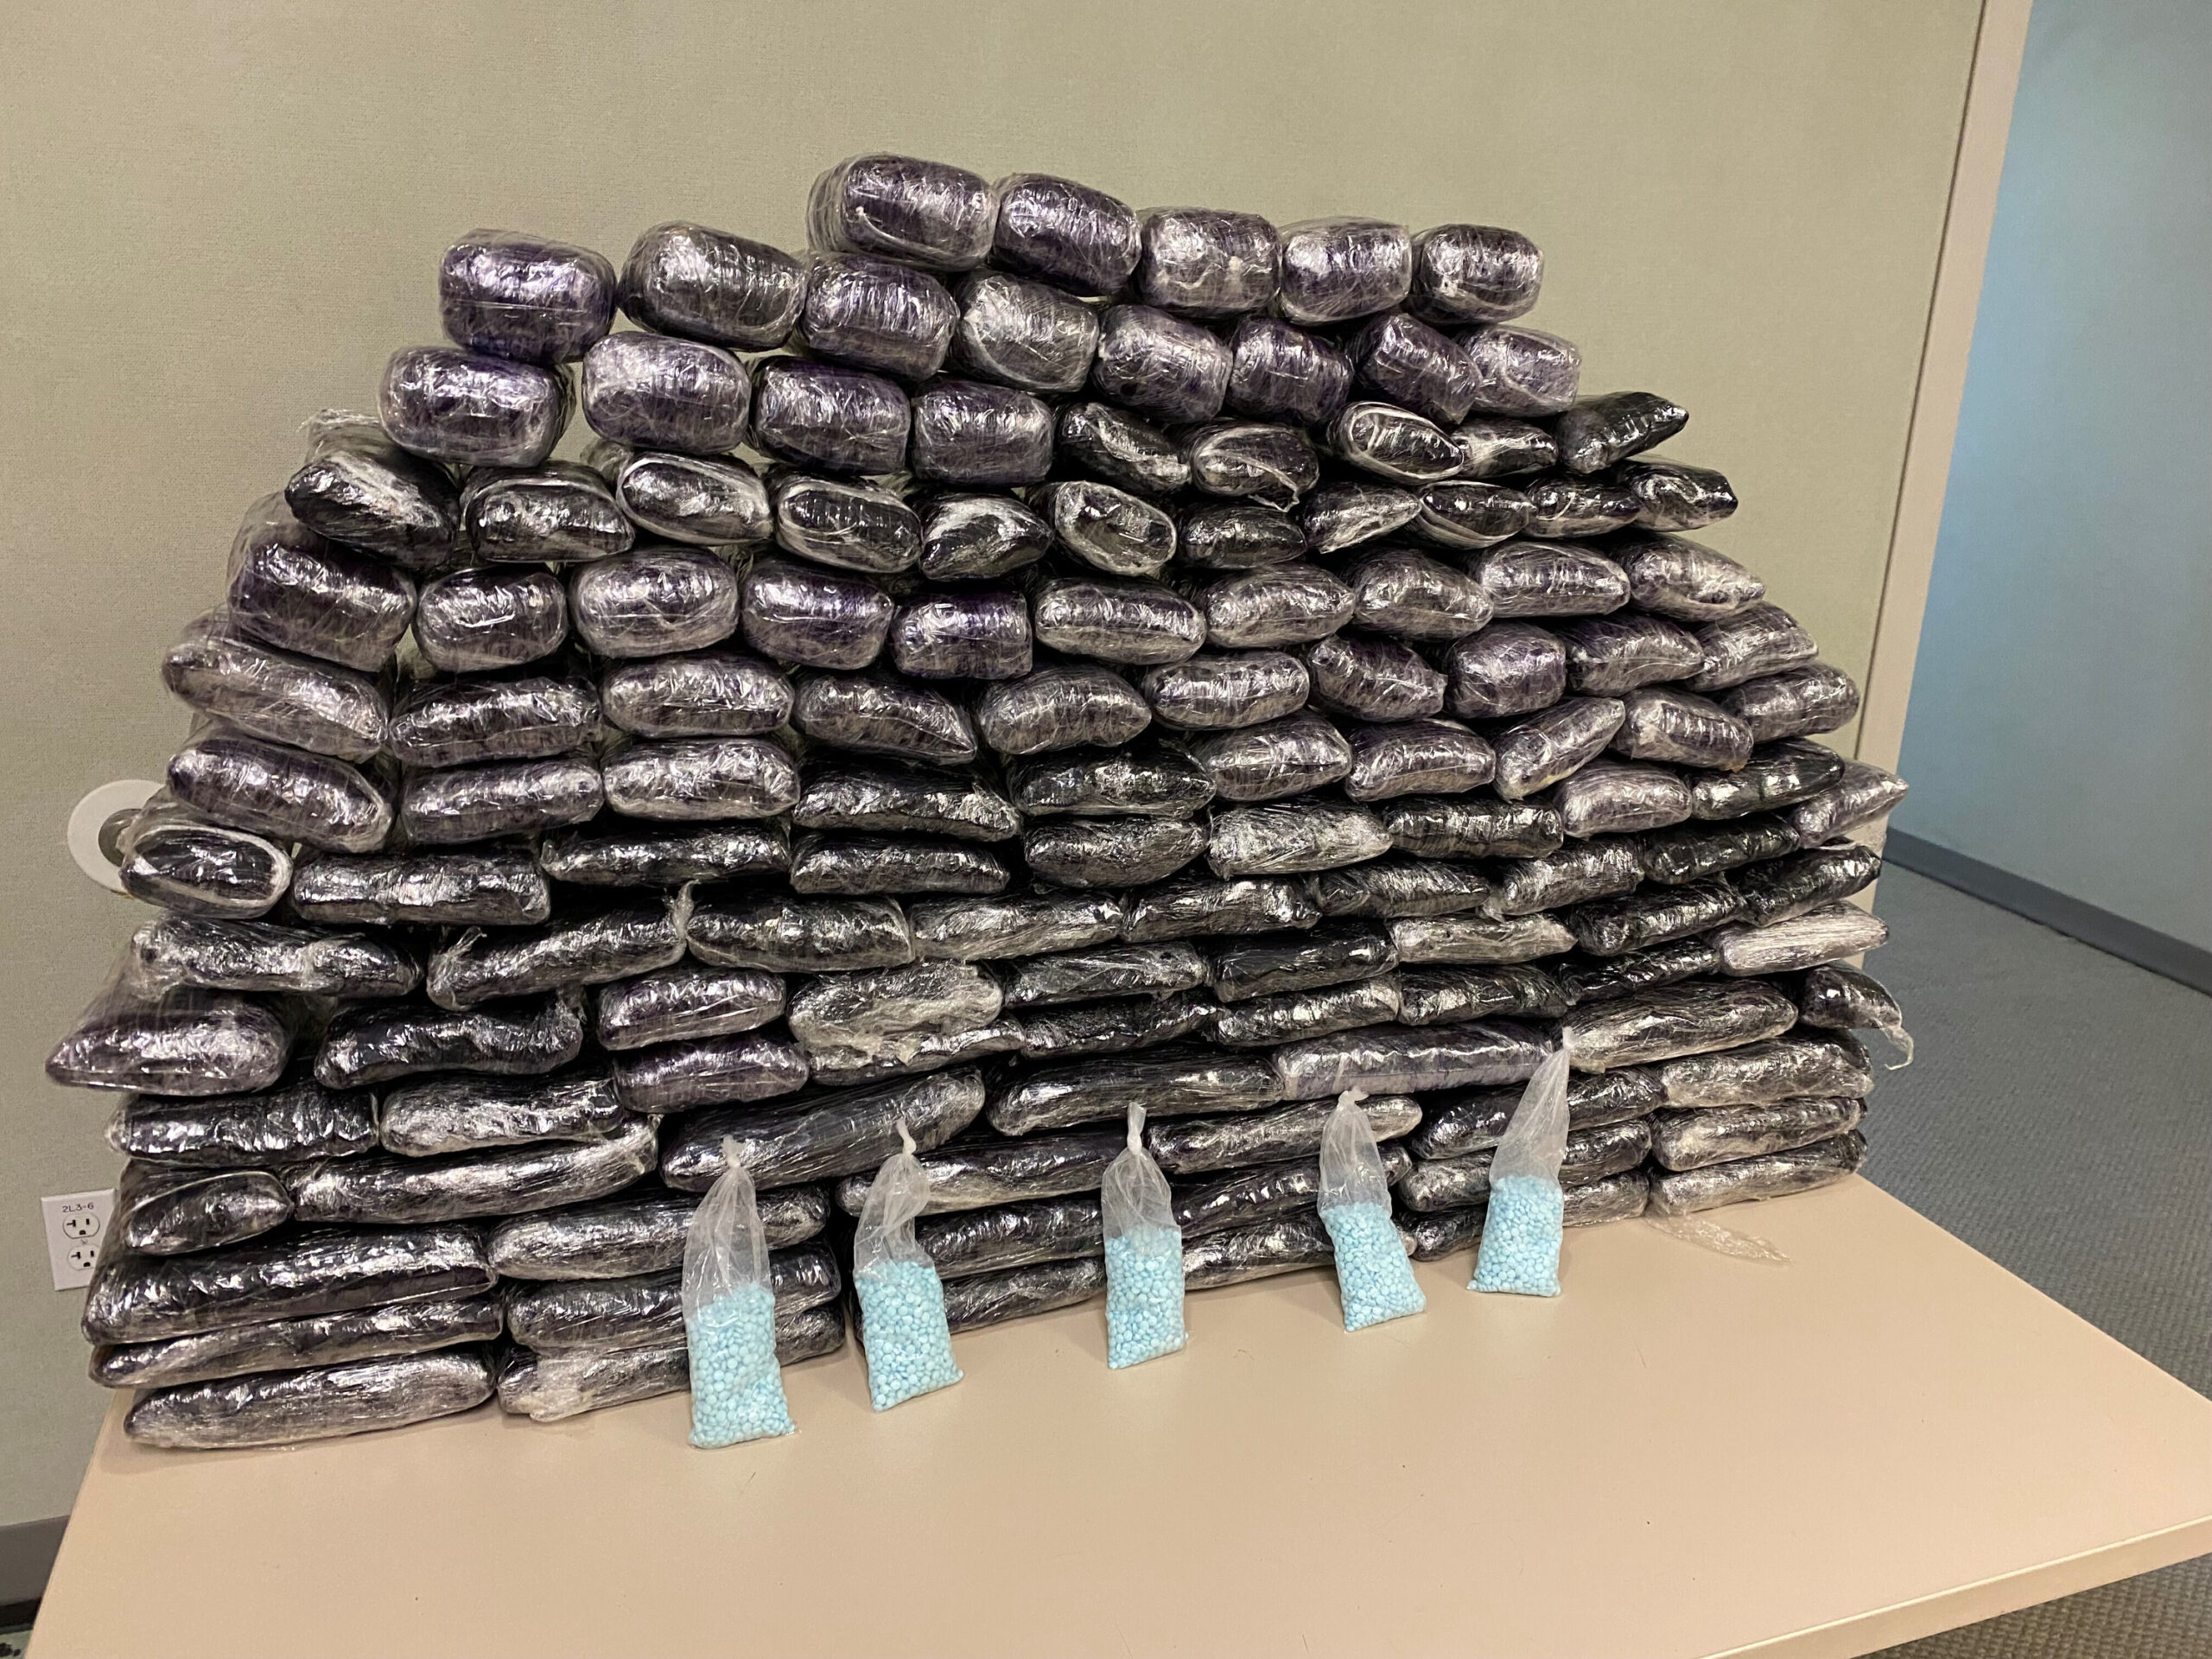 Seized fake pills containing fentanyl